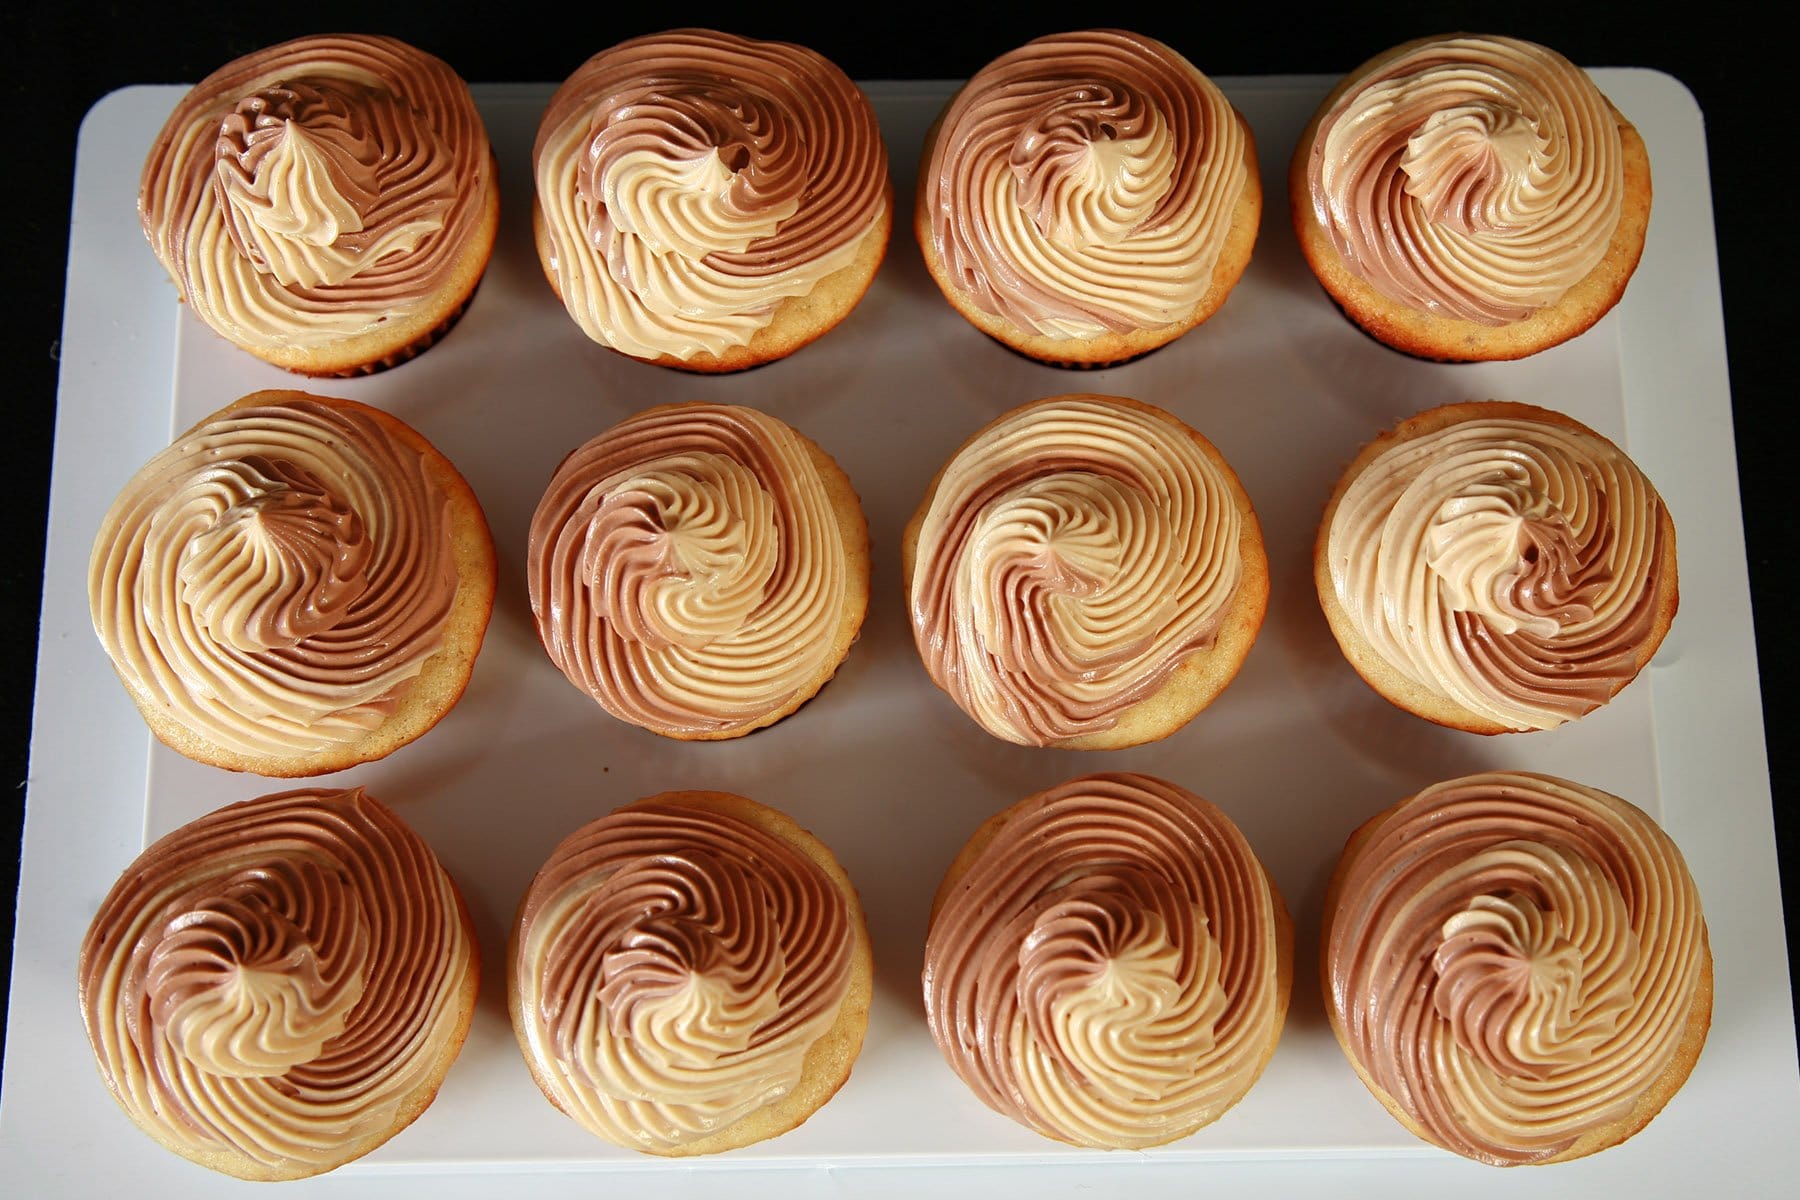 A tray of Fat Elvis Cupcakes - Banana cupcakes frosted with a two-tone swirl of Swiss Meringue buttercream, in both peanut butter and chocolate flavours.